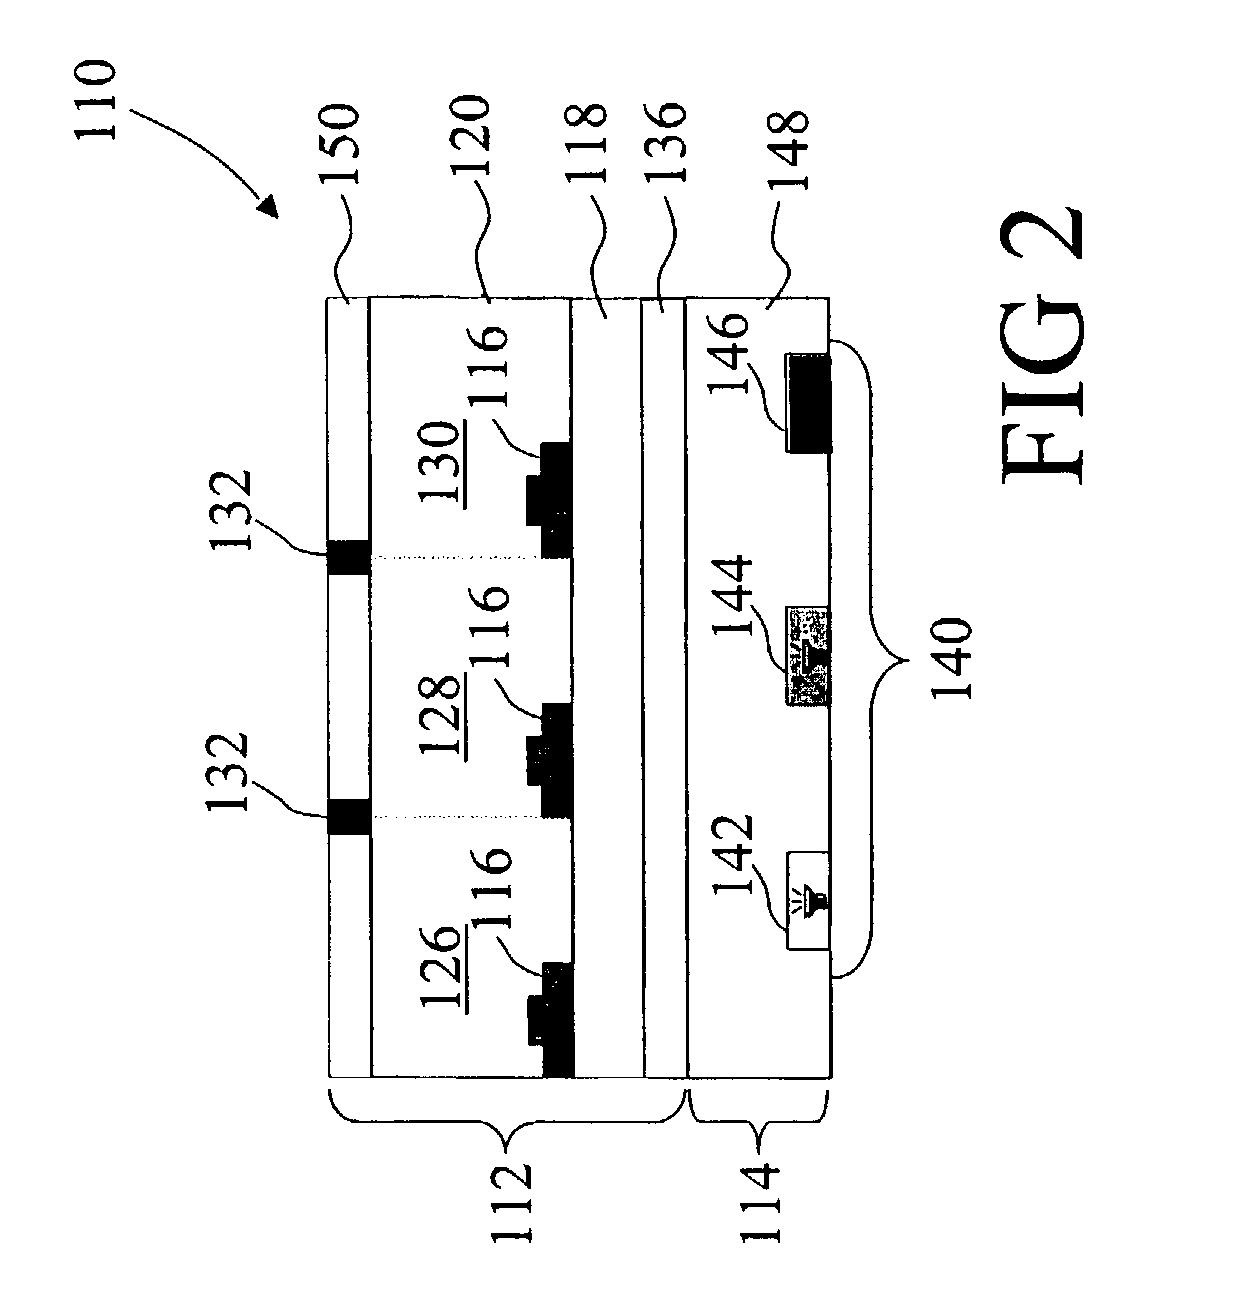 Liquid crystal display with color backlighting employing light emitting diodes